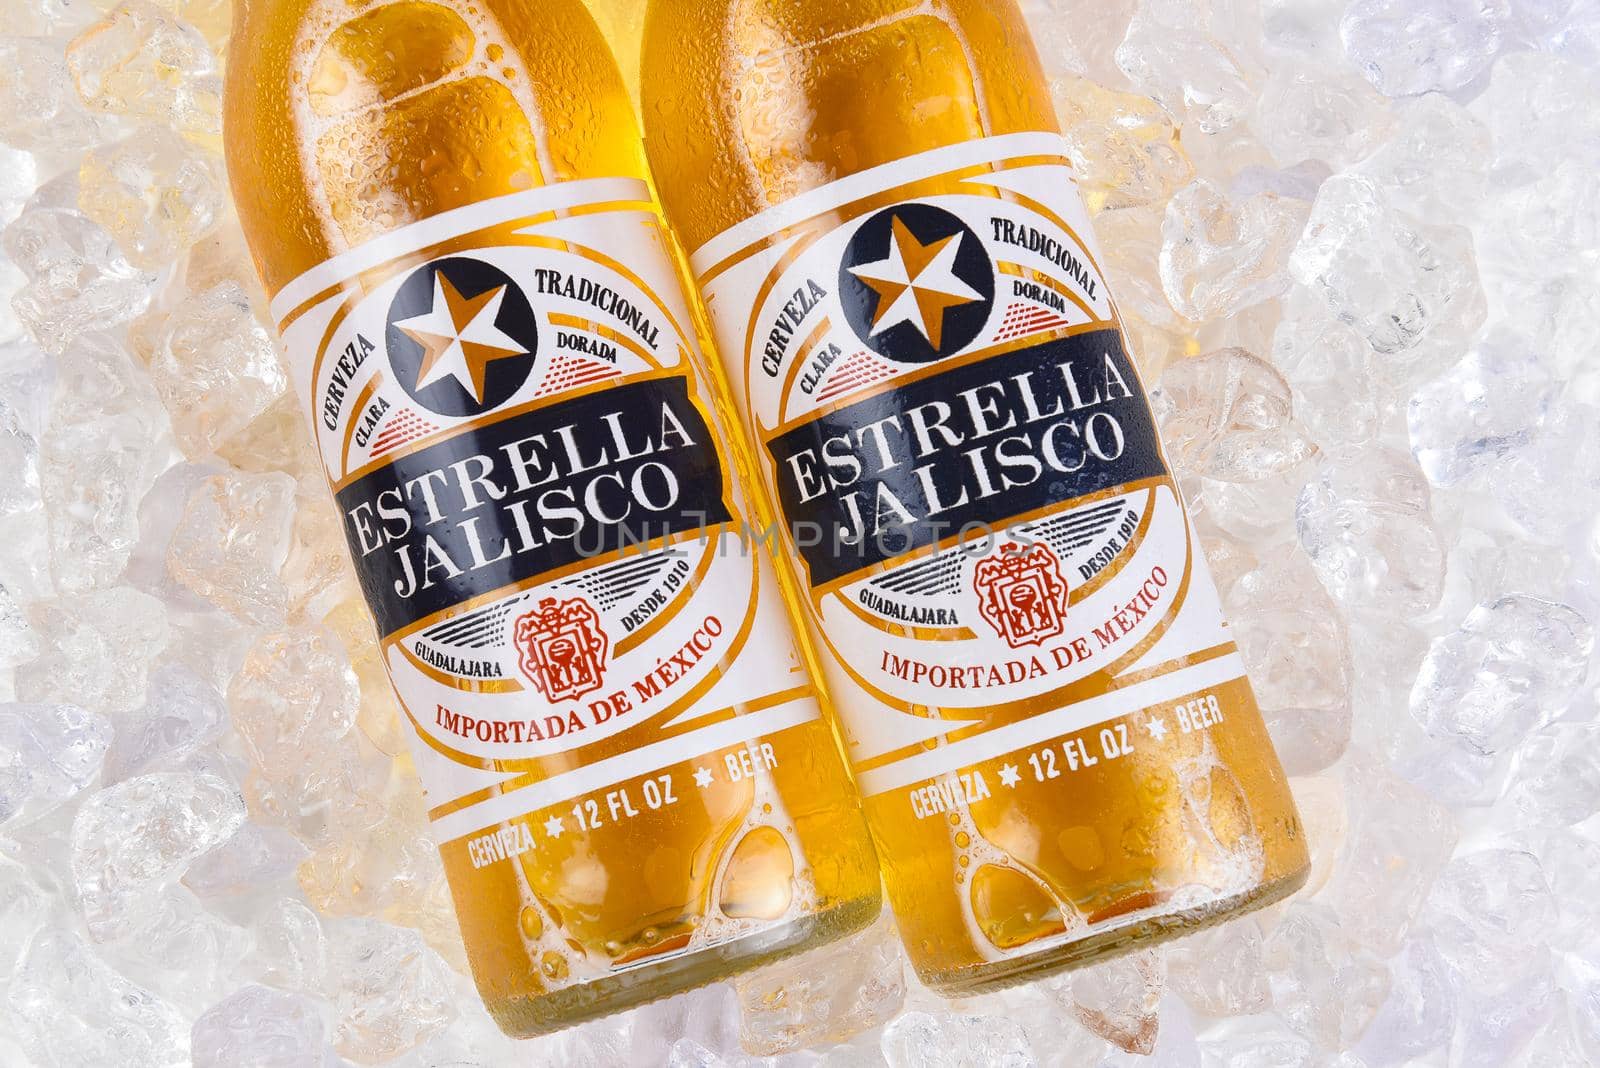 IRVINE, CALIFORNIA - MARCH 21, 2018: Two bottles of Estrella Jalisco Beer in ice closeup. Estrella Jalisco is a American Lager style beer brewed by Grupo Modelo.